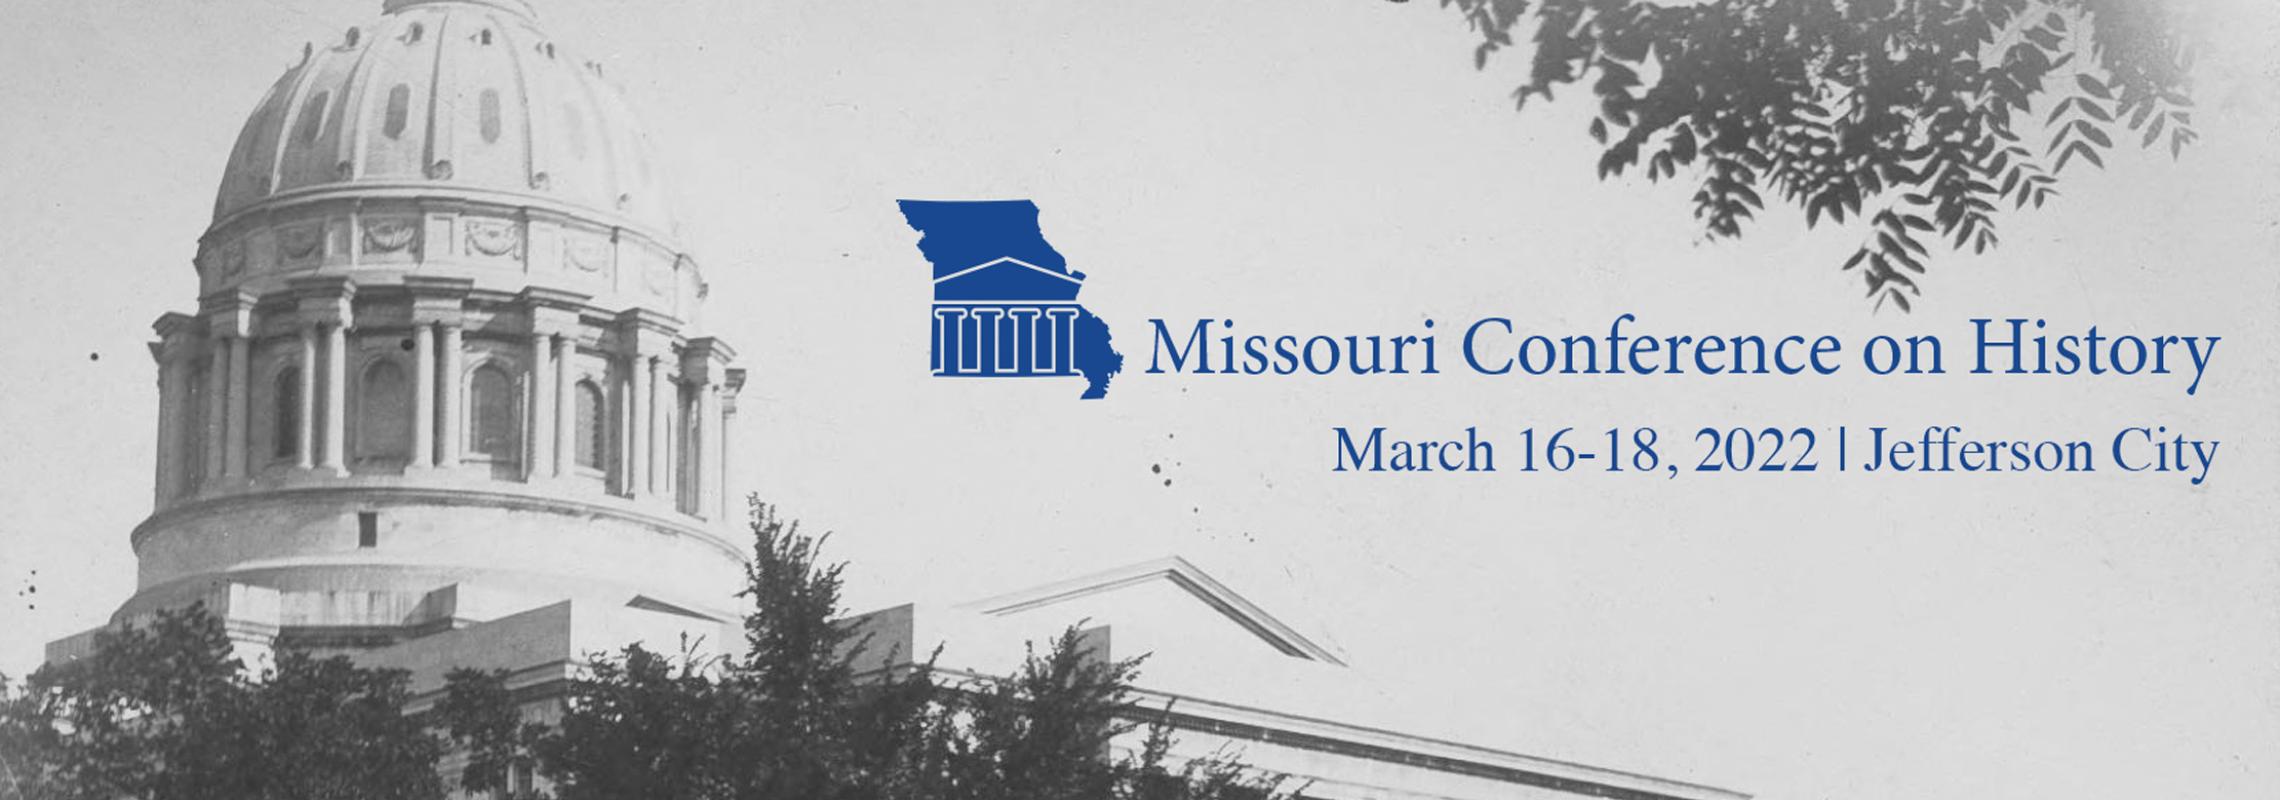 Missouri Conference on History March 16-18, 2022